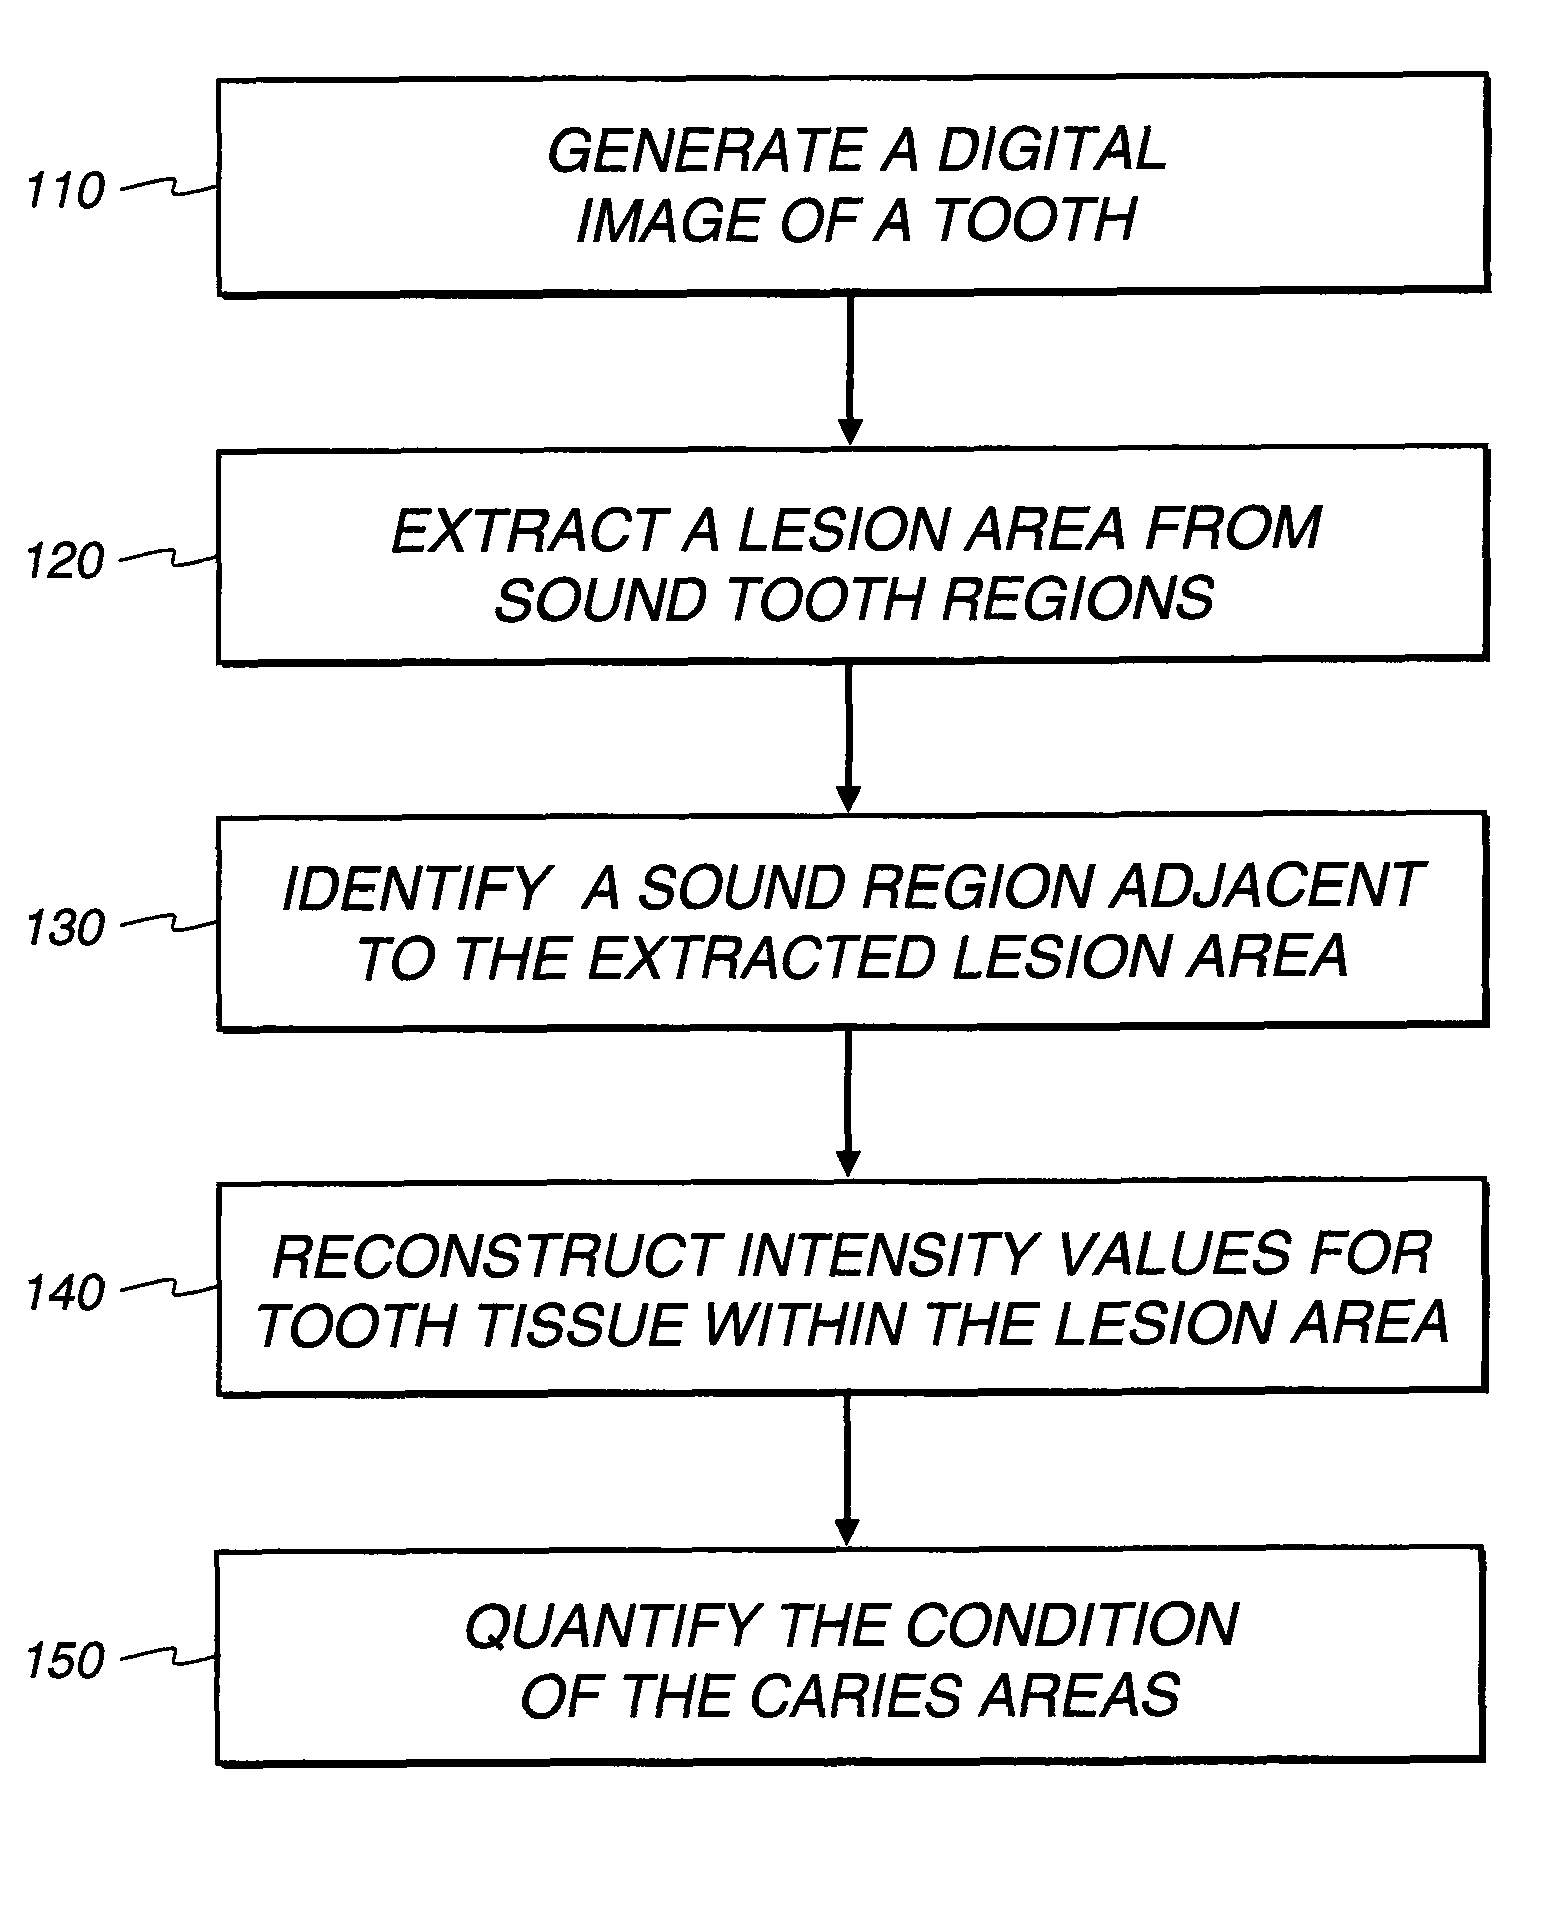 Method for quantifying caries